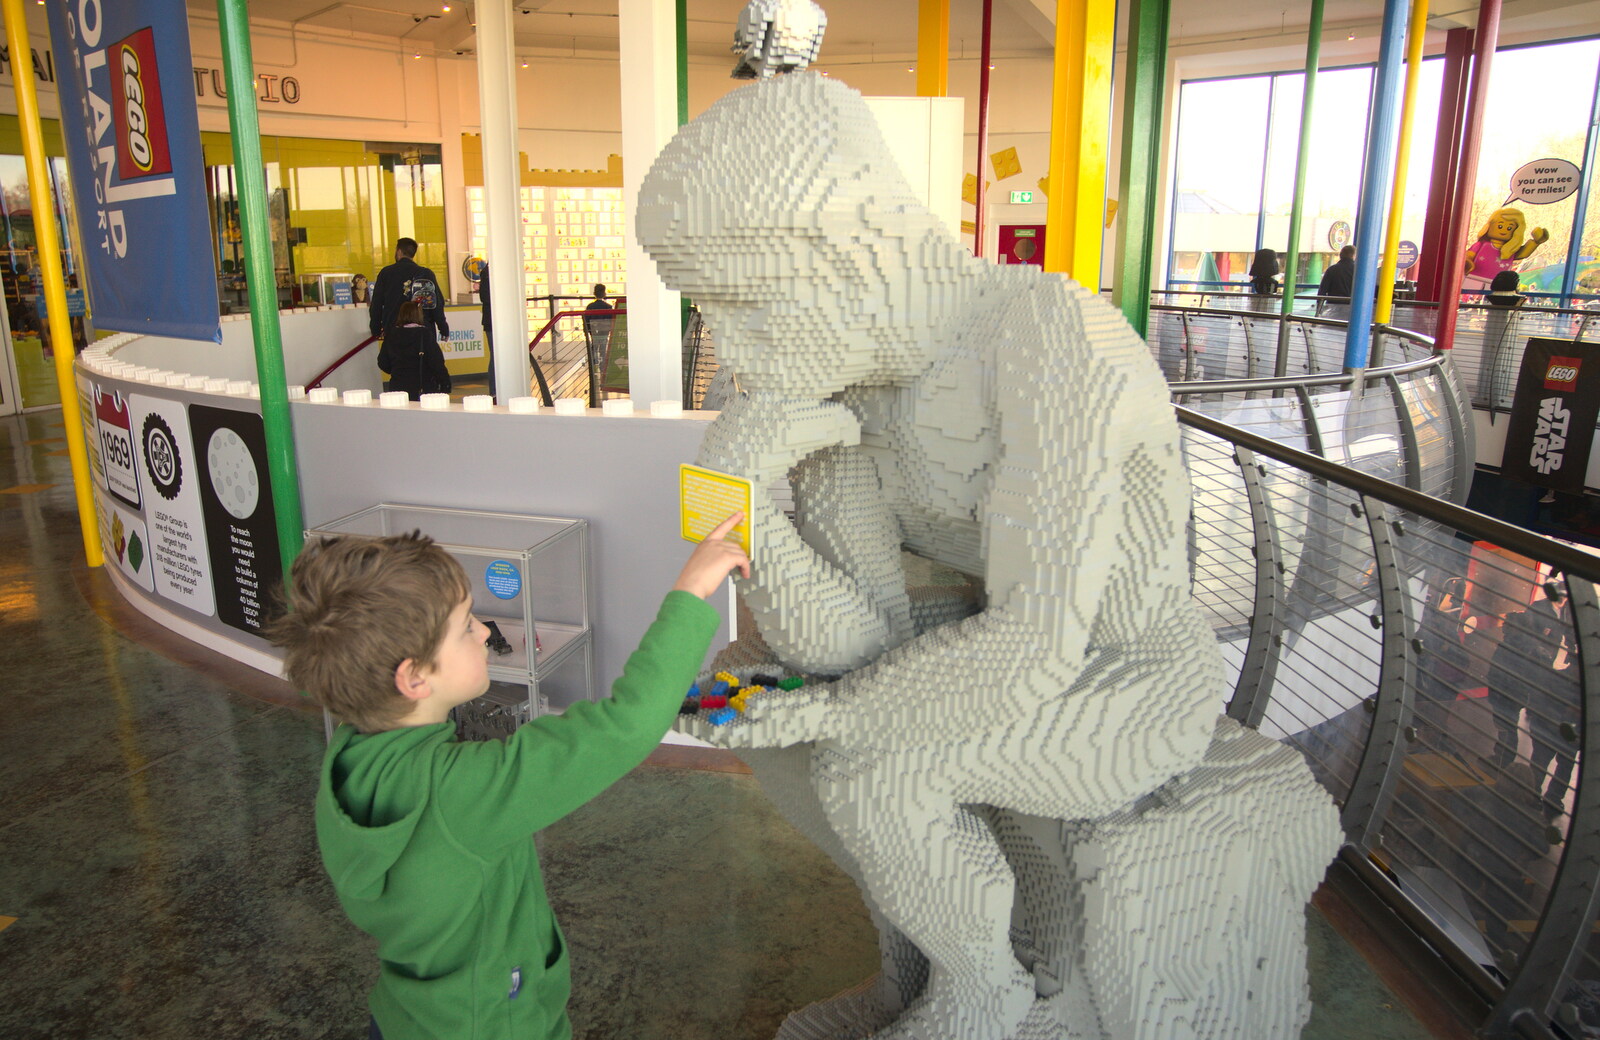 Fred reads about 'The Thinker' from A Trip to Legoland, Windsor, Berkshire - 25th March 2017